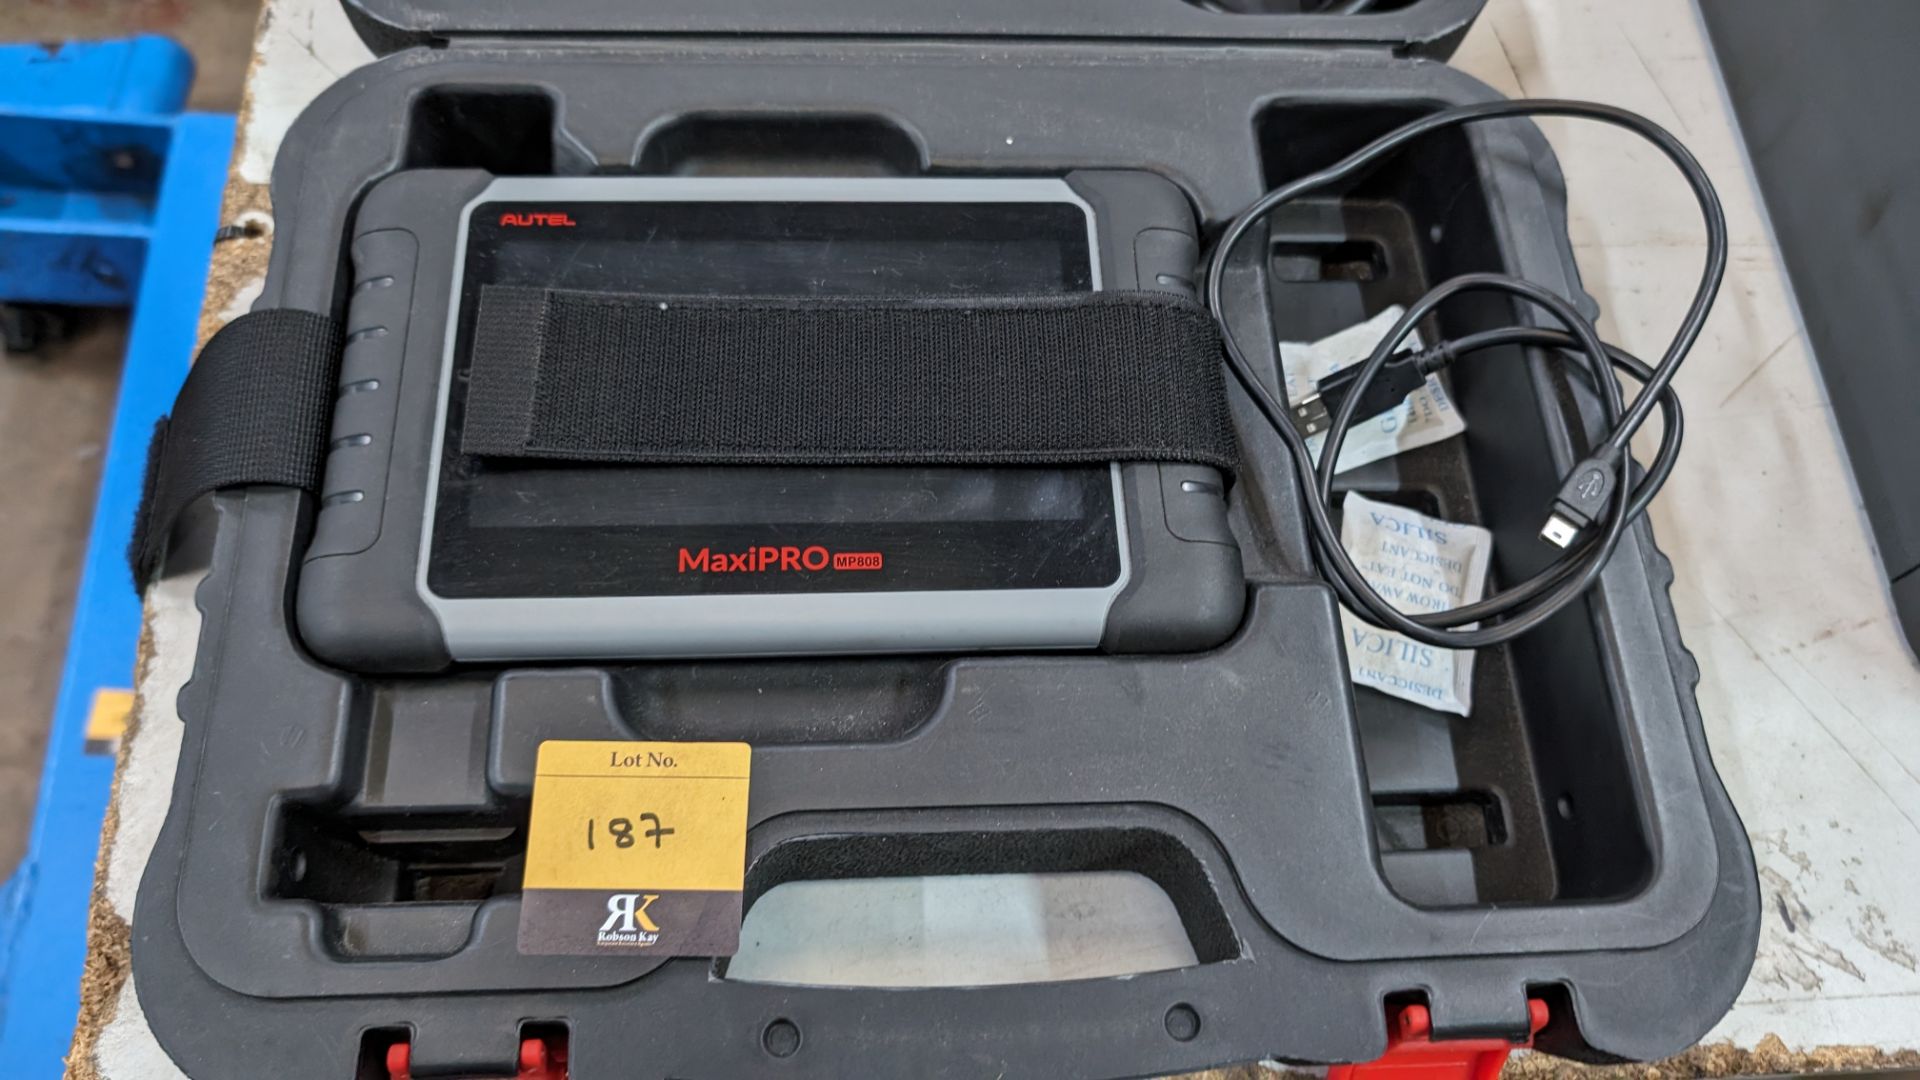 Autel MaxiPRO model MP808 touchscreen diagnostics device including case, cables & book pack - Image 2 of 11